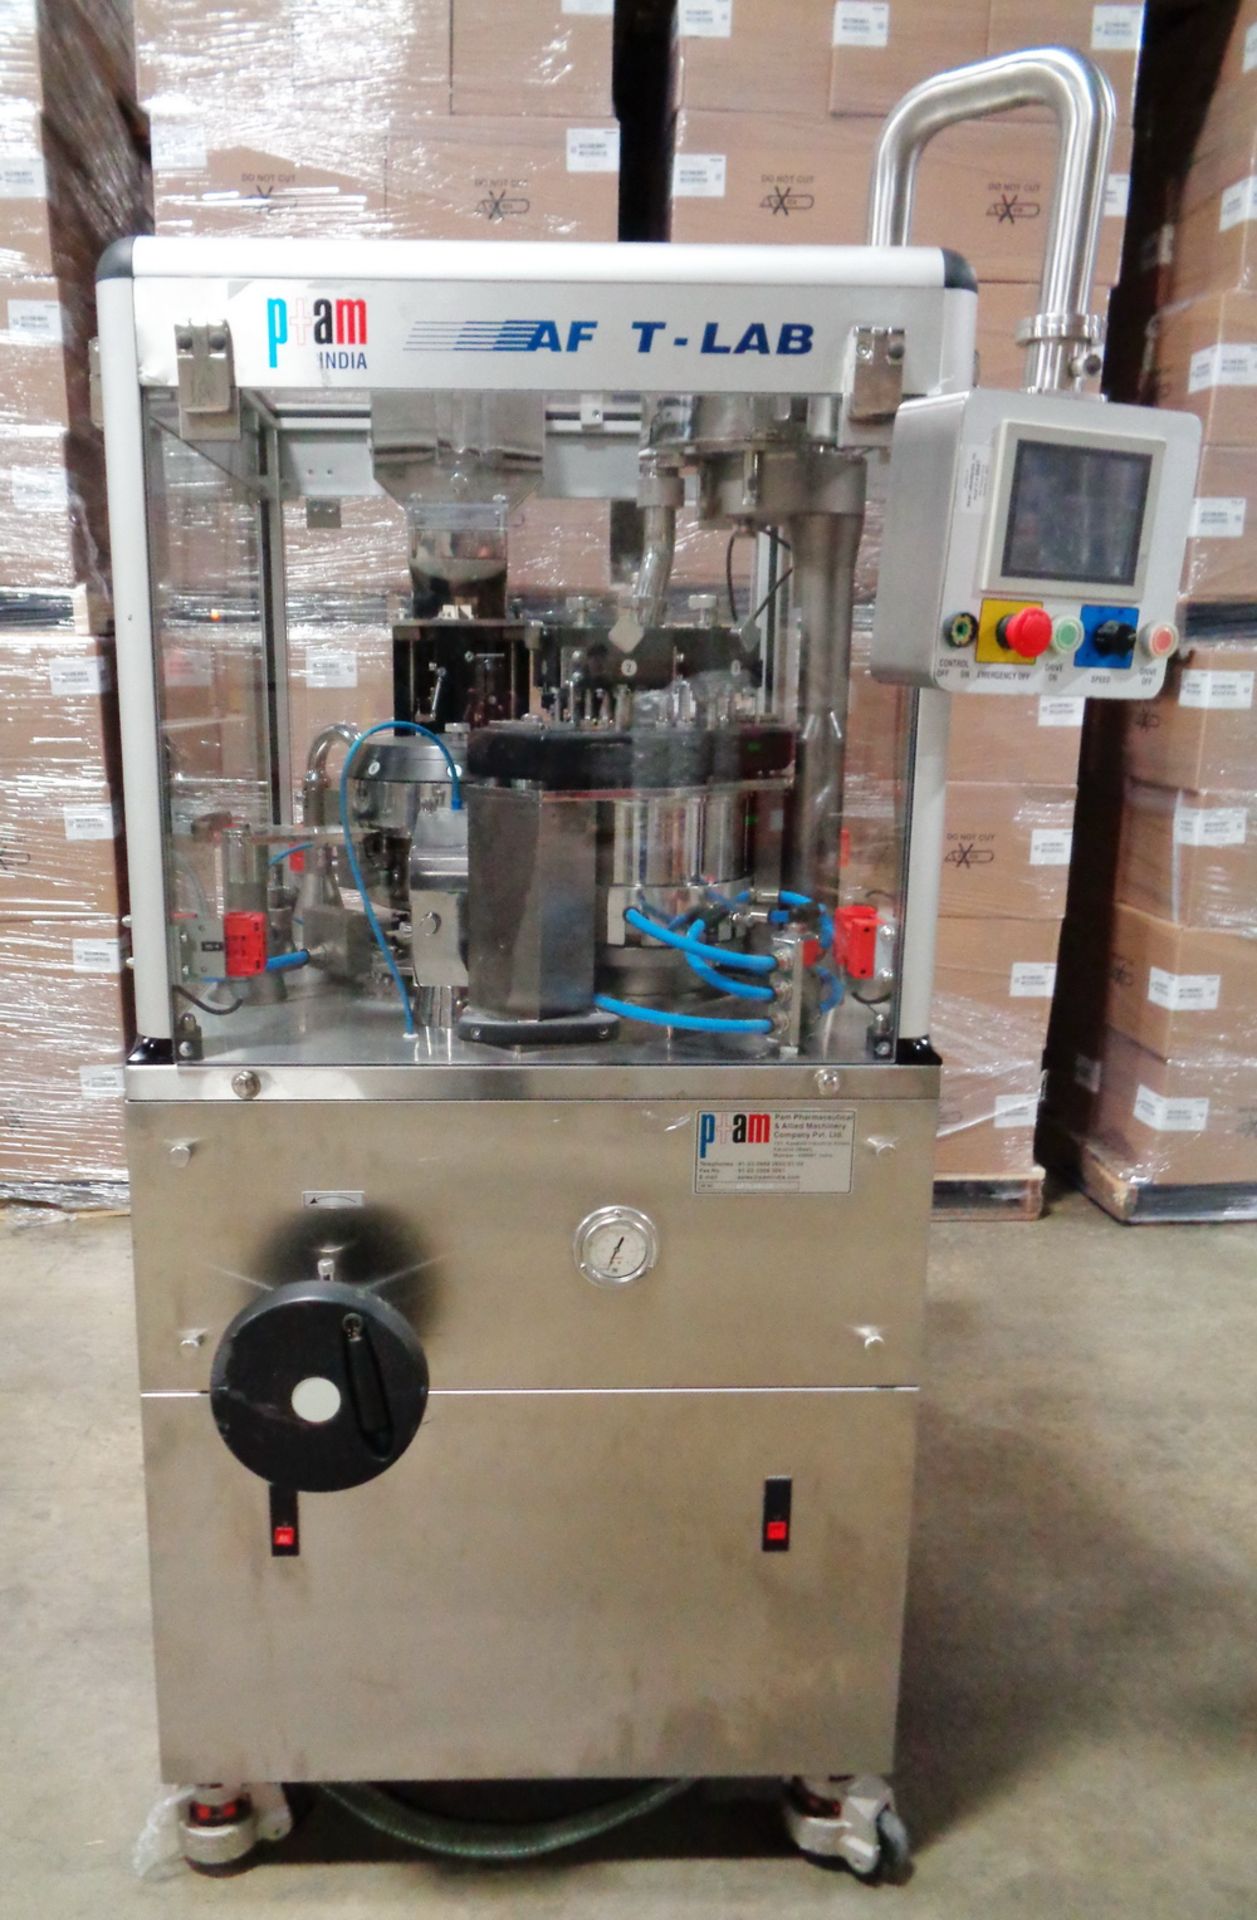 ACG R&D and Lab Scale Automatic Capsule Filler, Model AF T-Lab, S/N AFTLAB-05